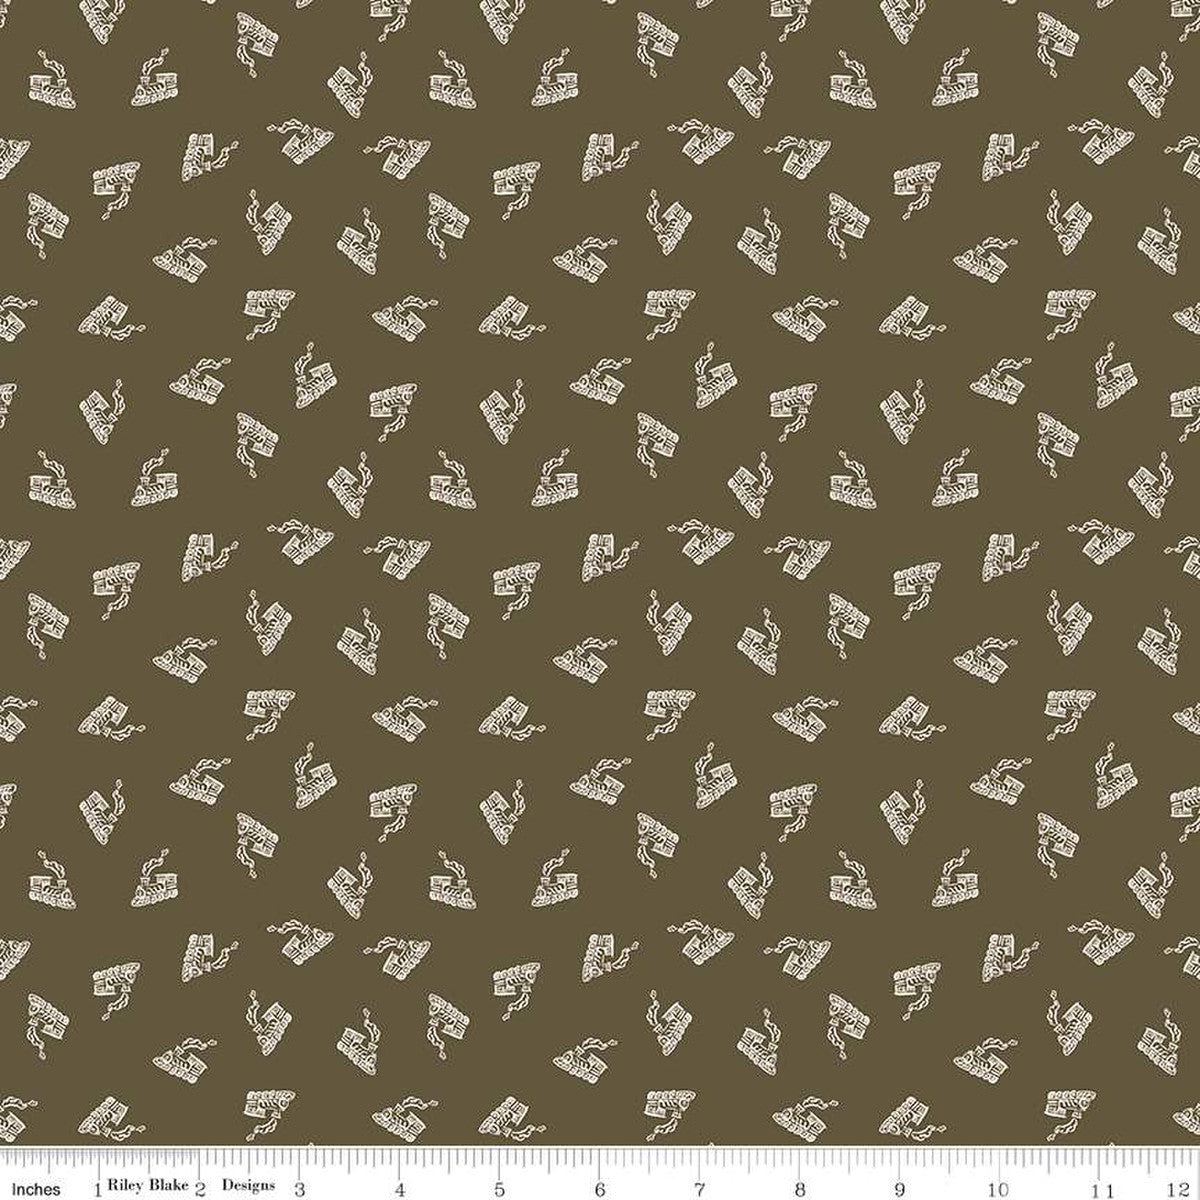 Round the Mountain All Aboard Brown tone on tone Riley Blake Designs small scattered tan trains on brown background by Casey Cometti Quilt weight quality cotton fabric